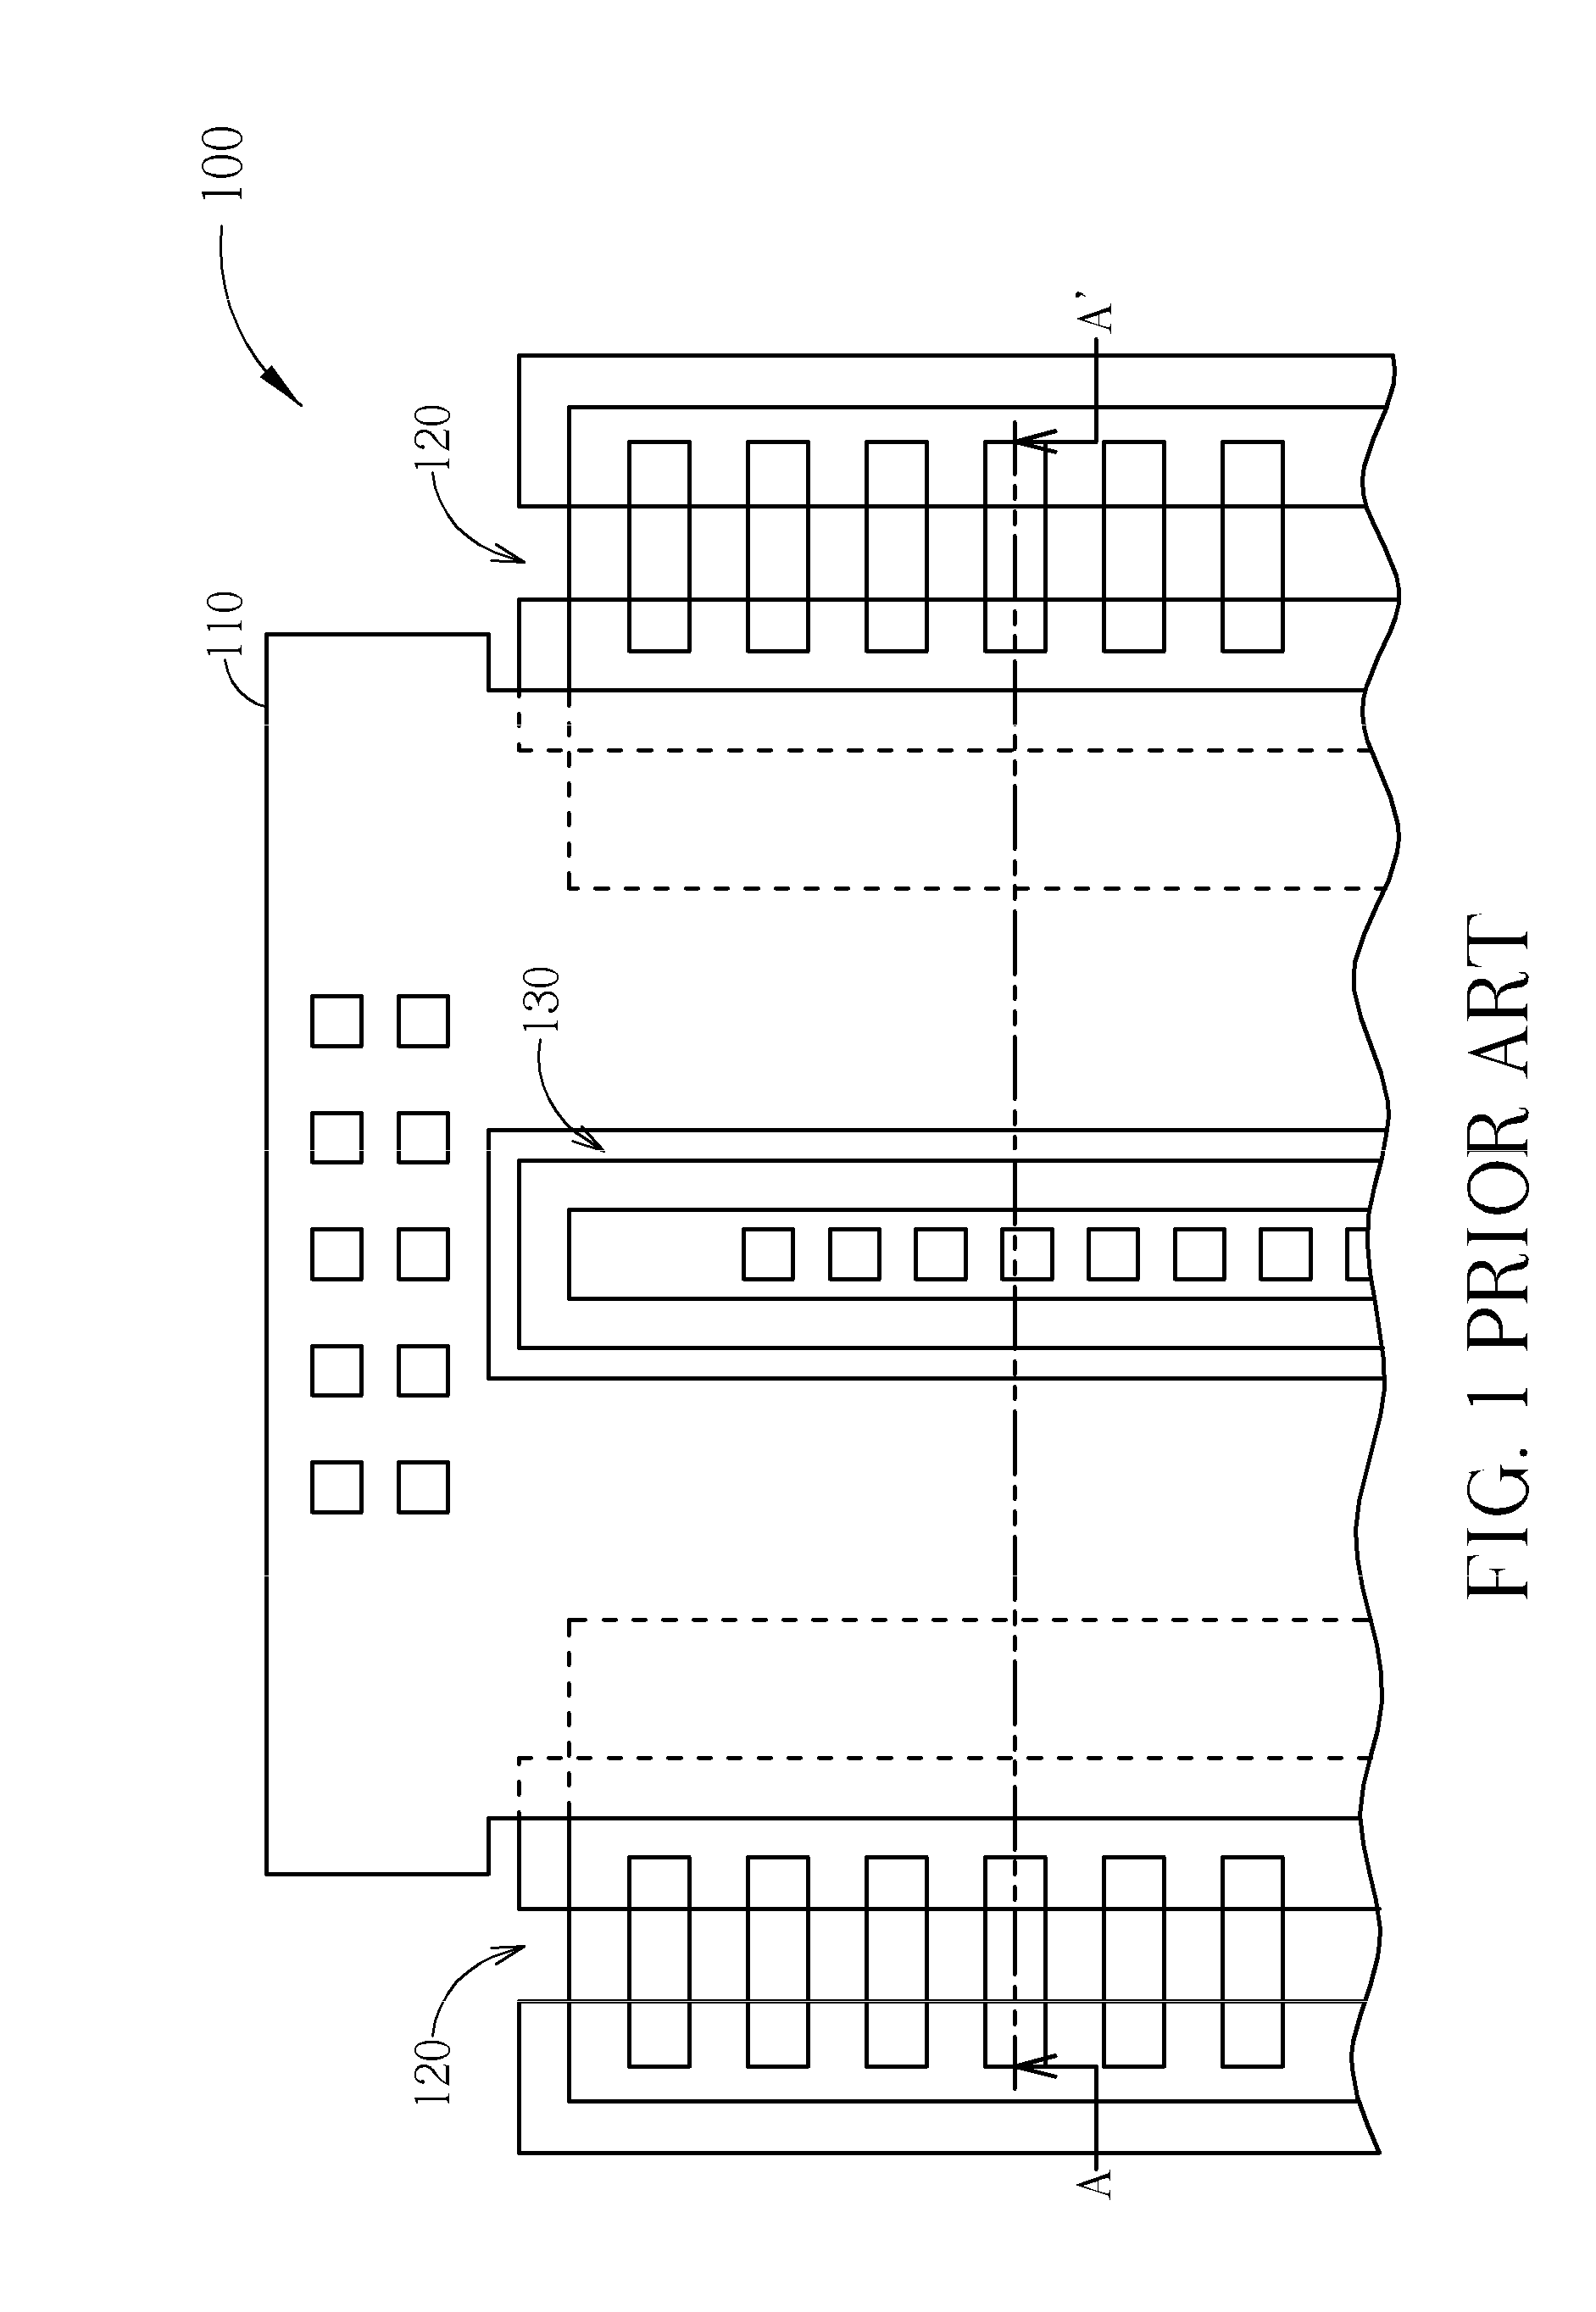 Lateral-diffusion metal-oxide-semiconductor device